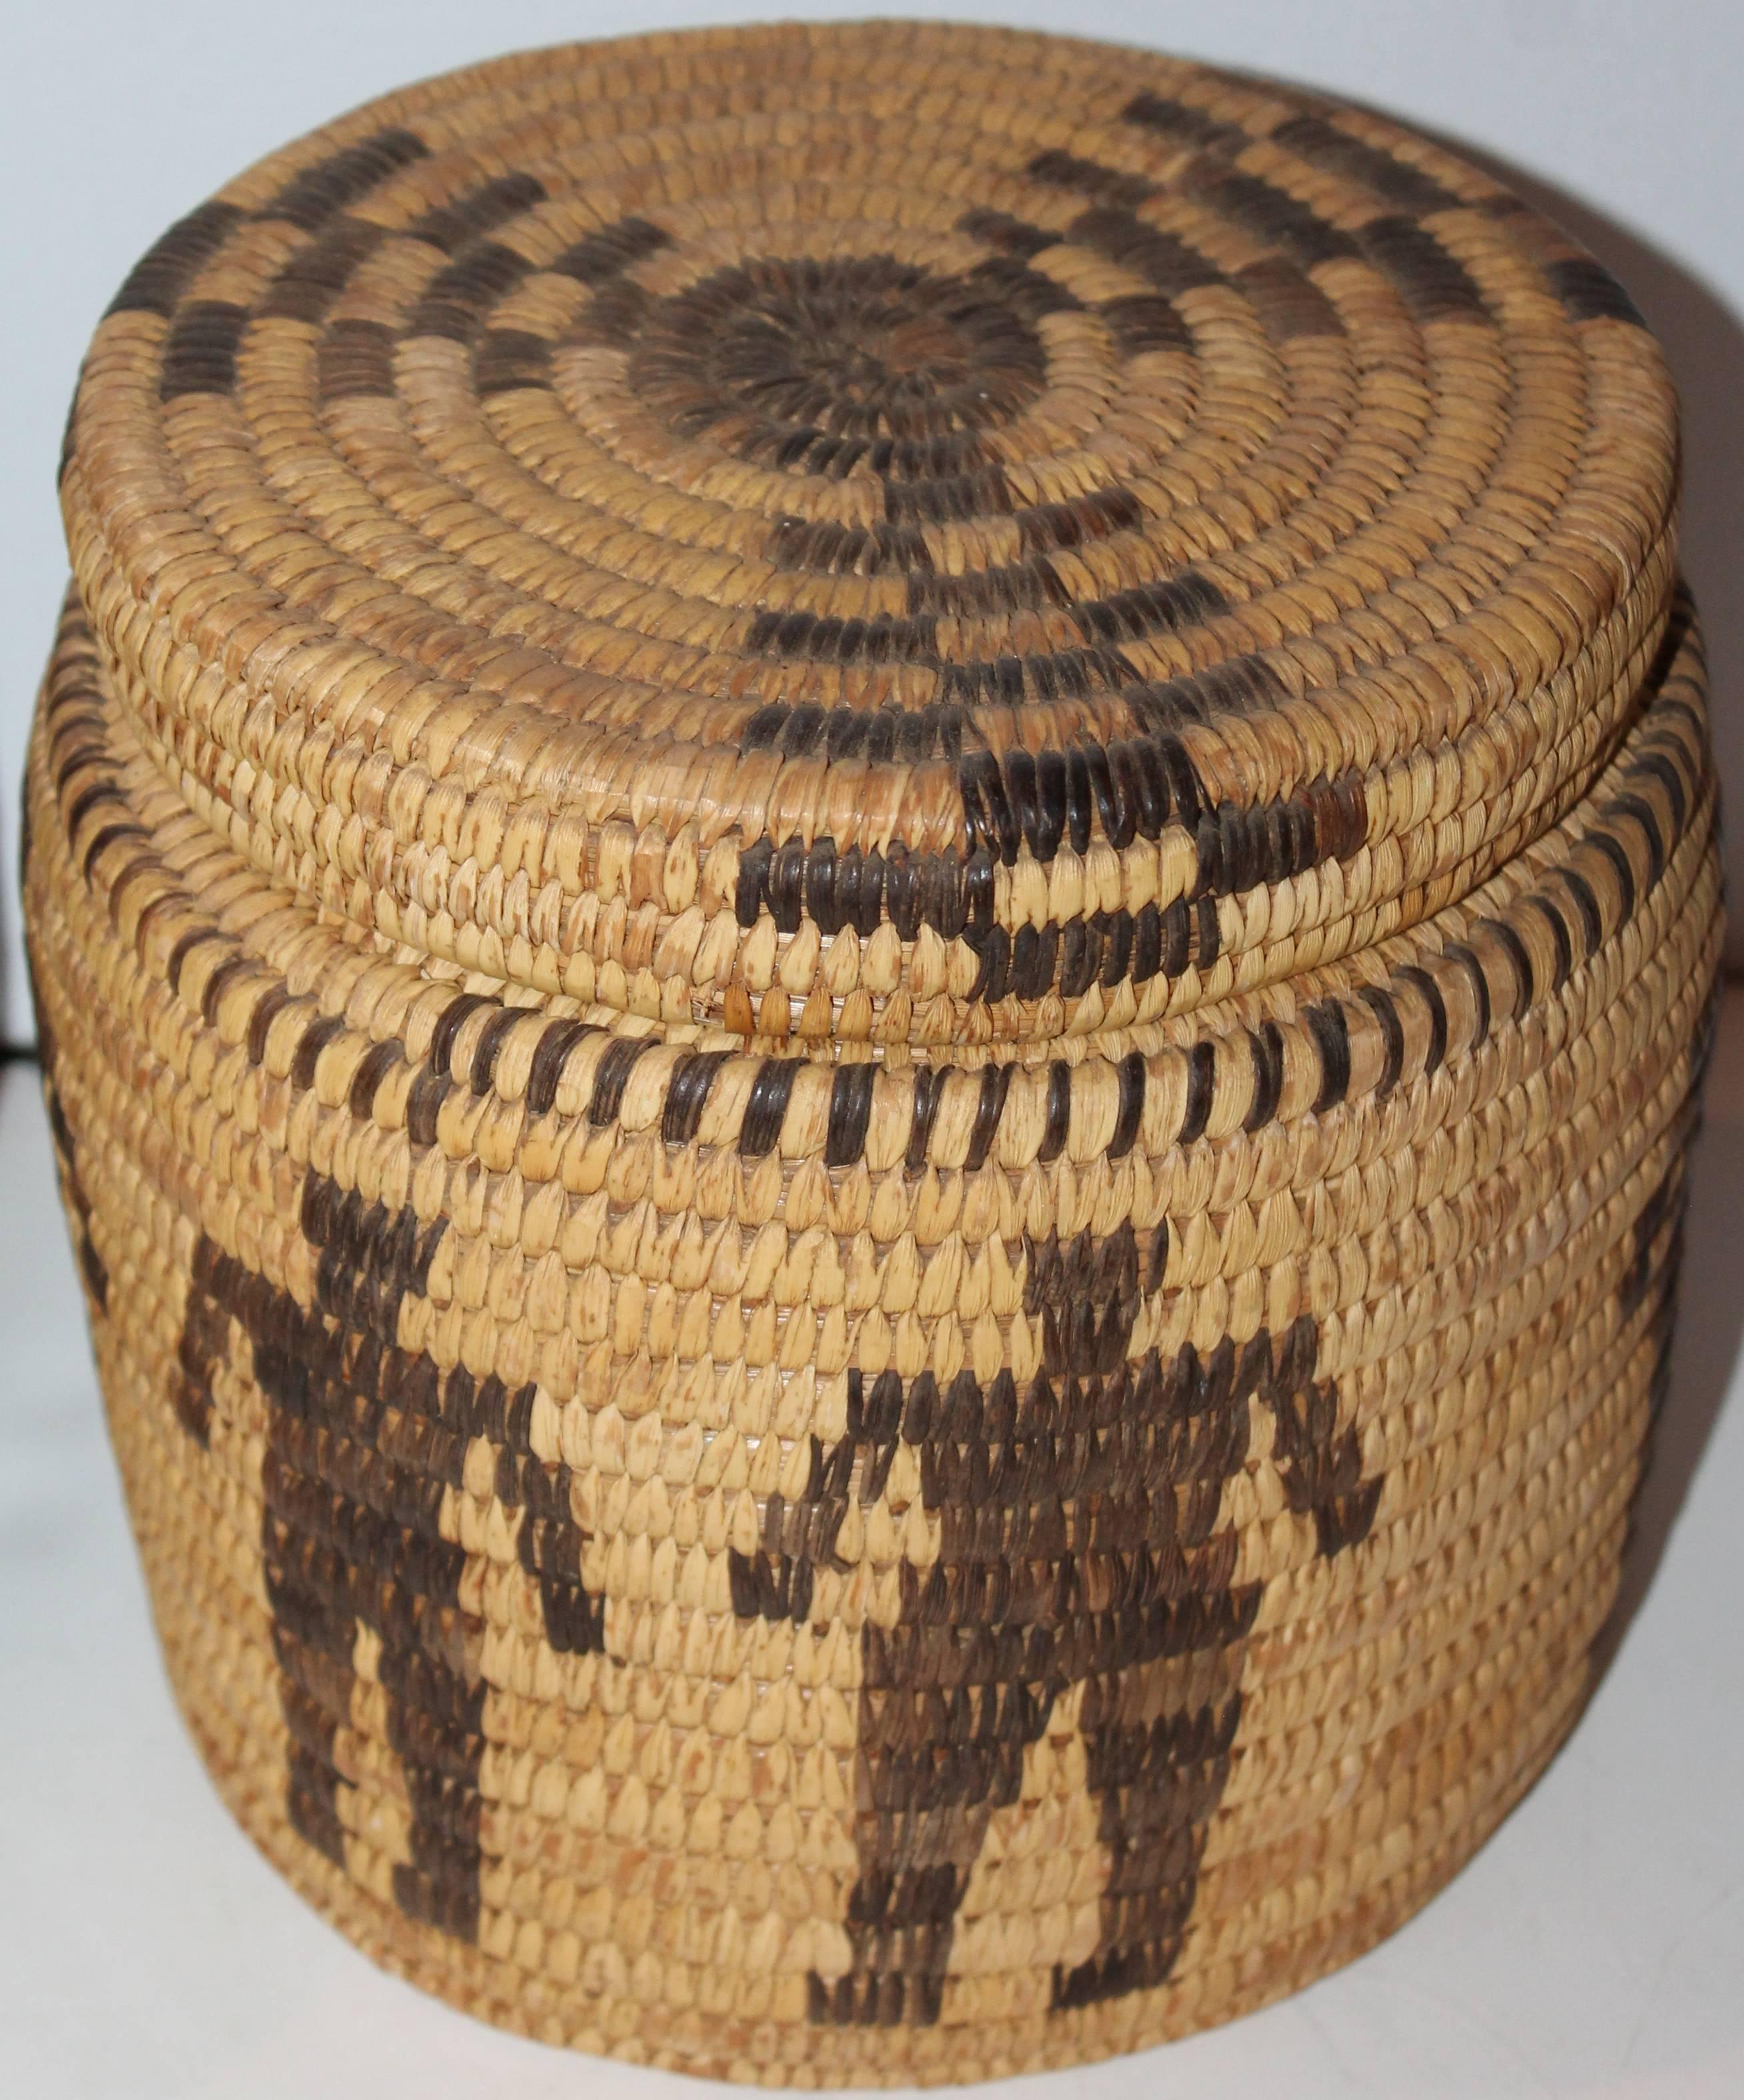 These fantastic baskets are in great condition and were both in a private collection. They can be purchased individually for 1850.00 each. These baskets are sold as a pair as they look like they were made by the same person. The condition is very